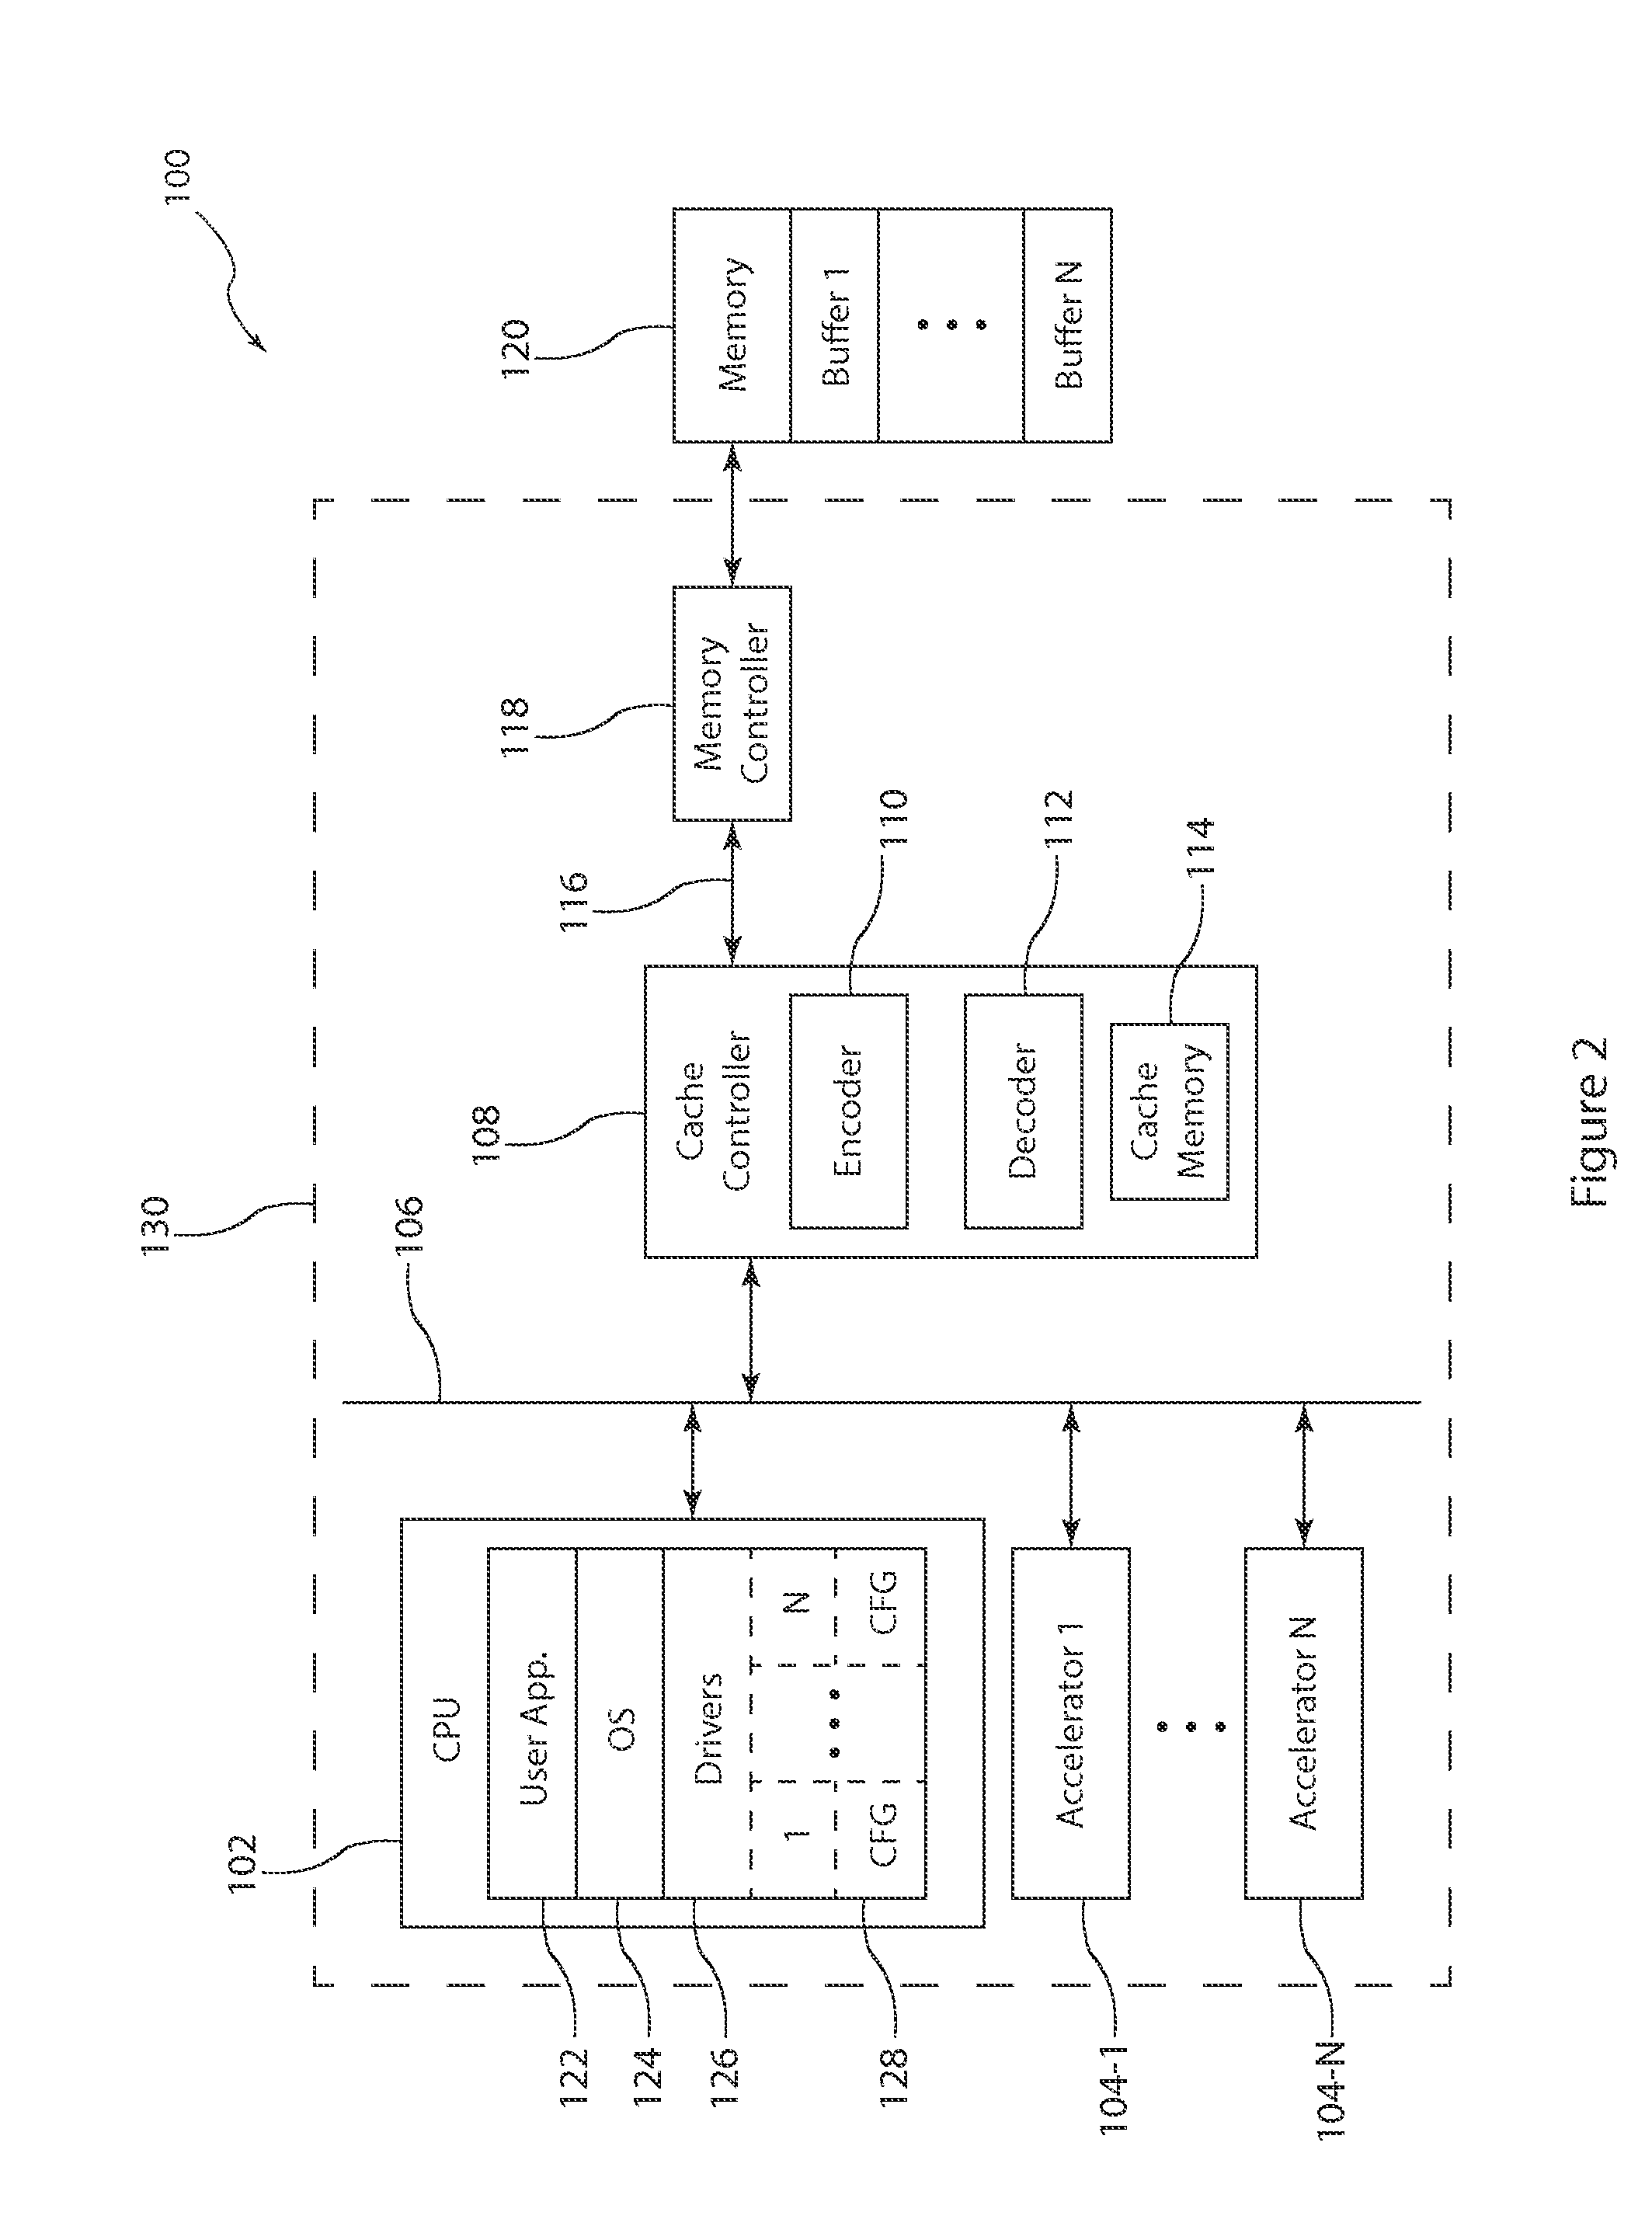 Cache Memory Controller for Accelerated Data Transfer